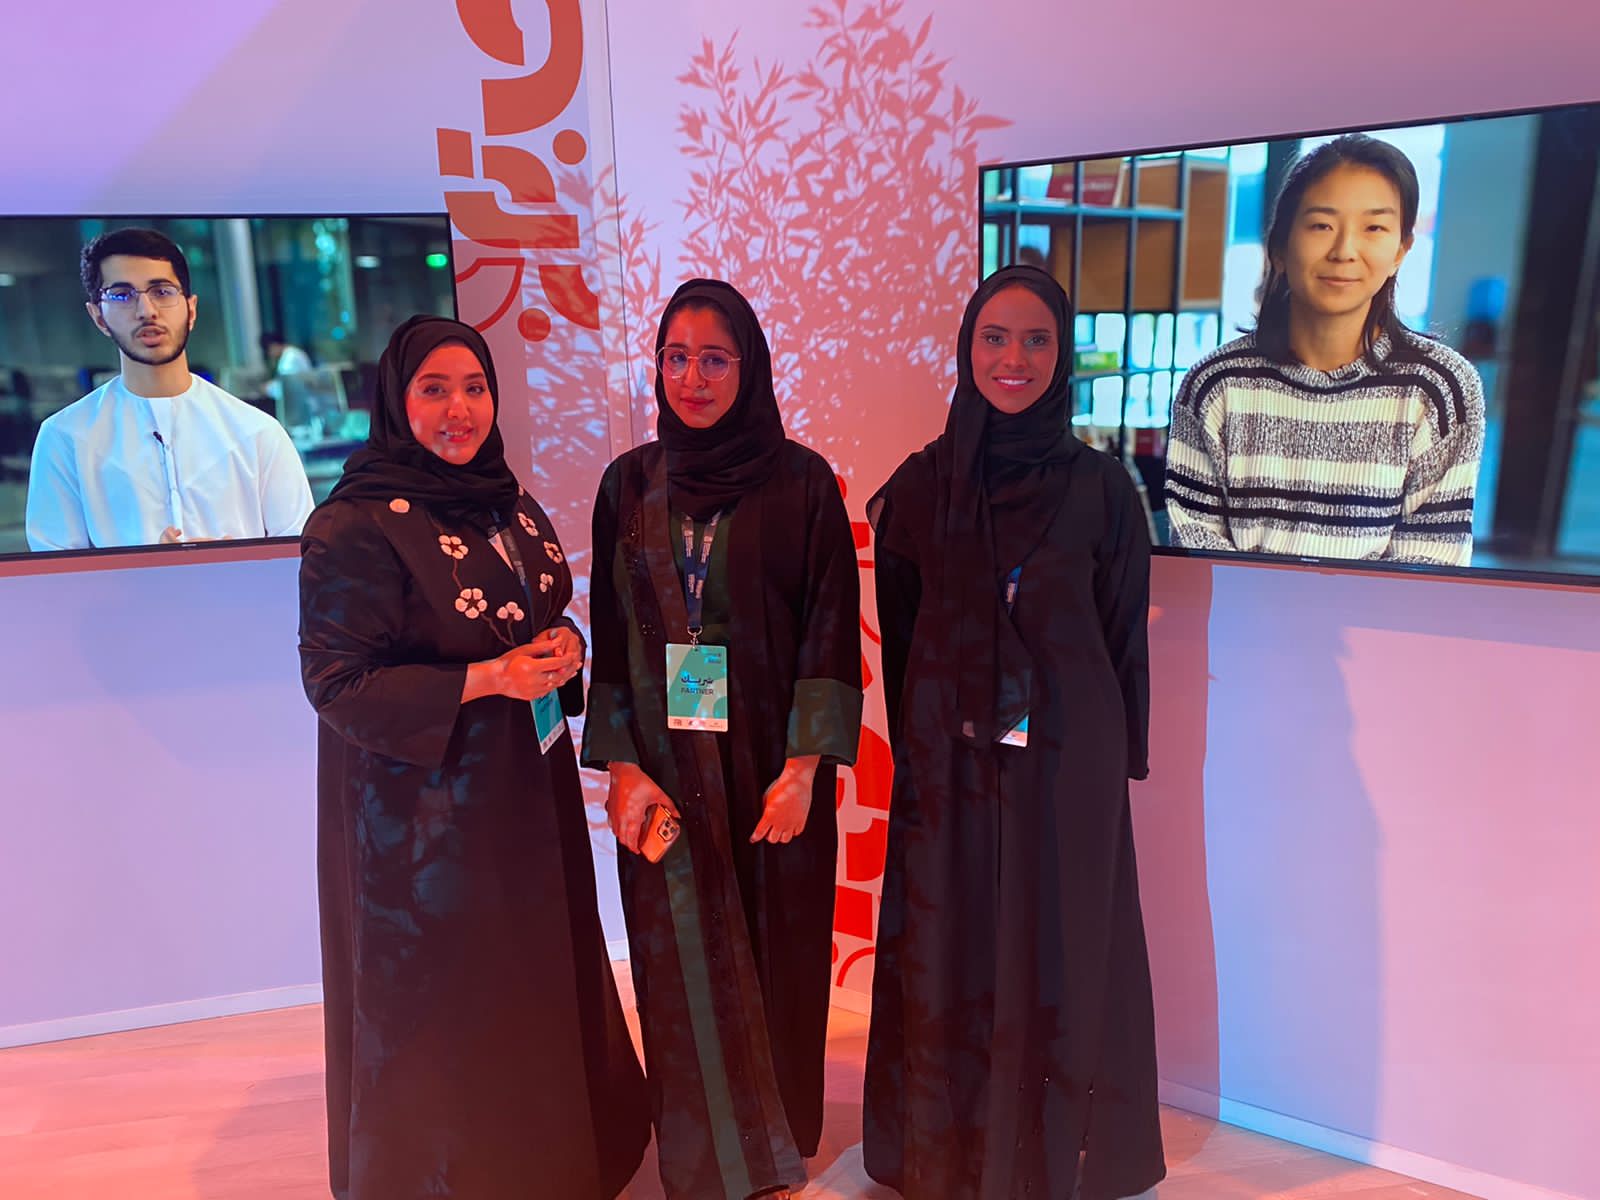 42 Abu Dhabi Participates In Parenthood: The Unconference Event